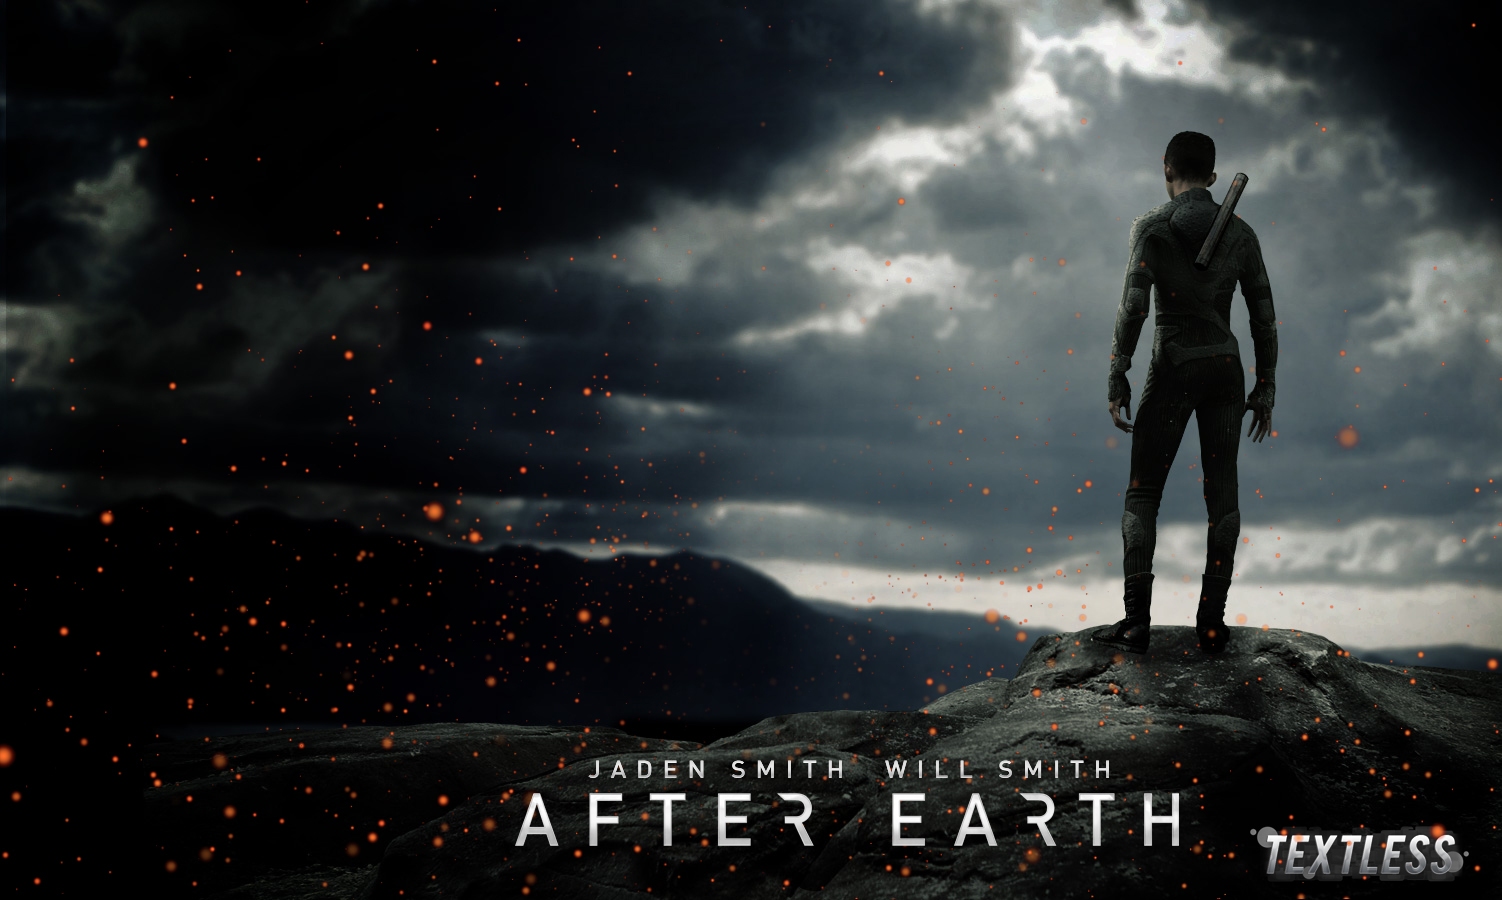 Hollywood Movie After Earth HD Wallpaper Is Here For You Pick